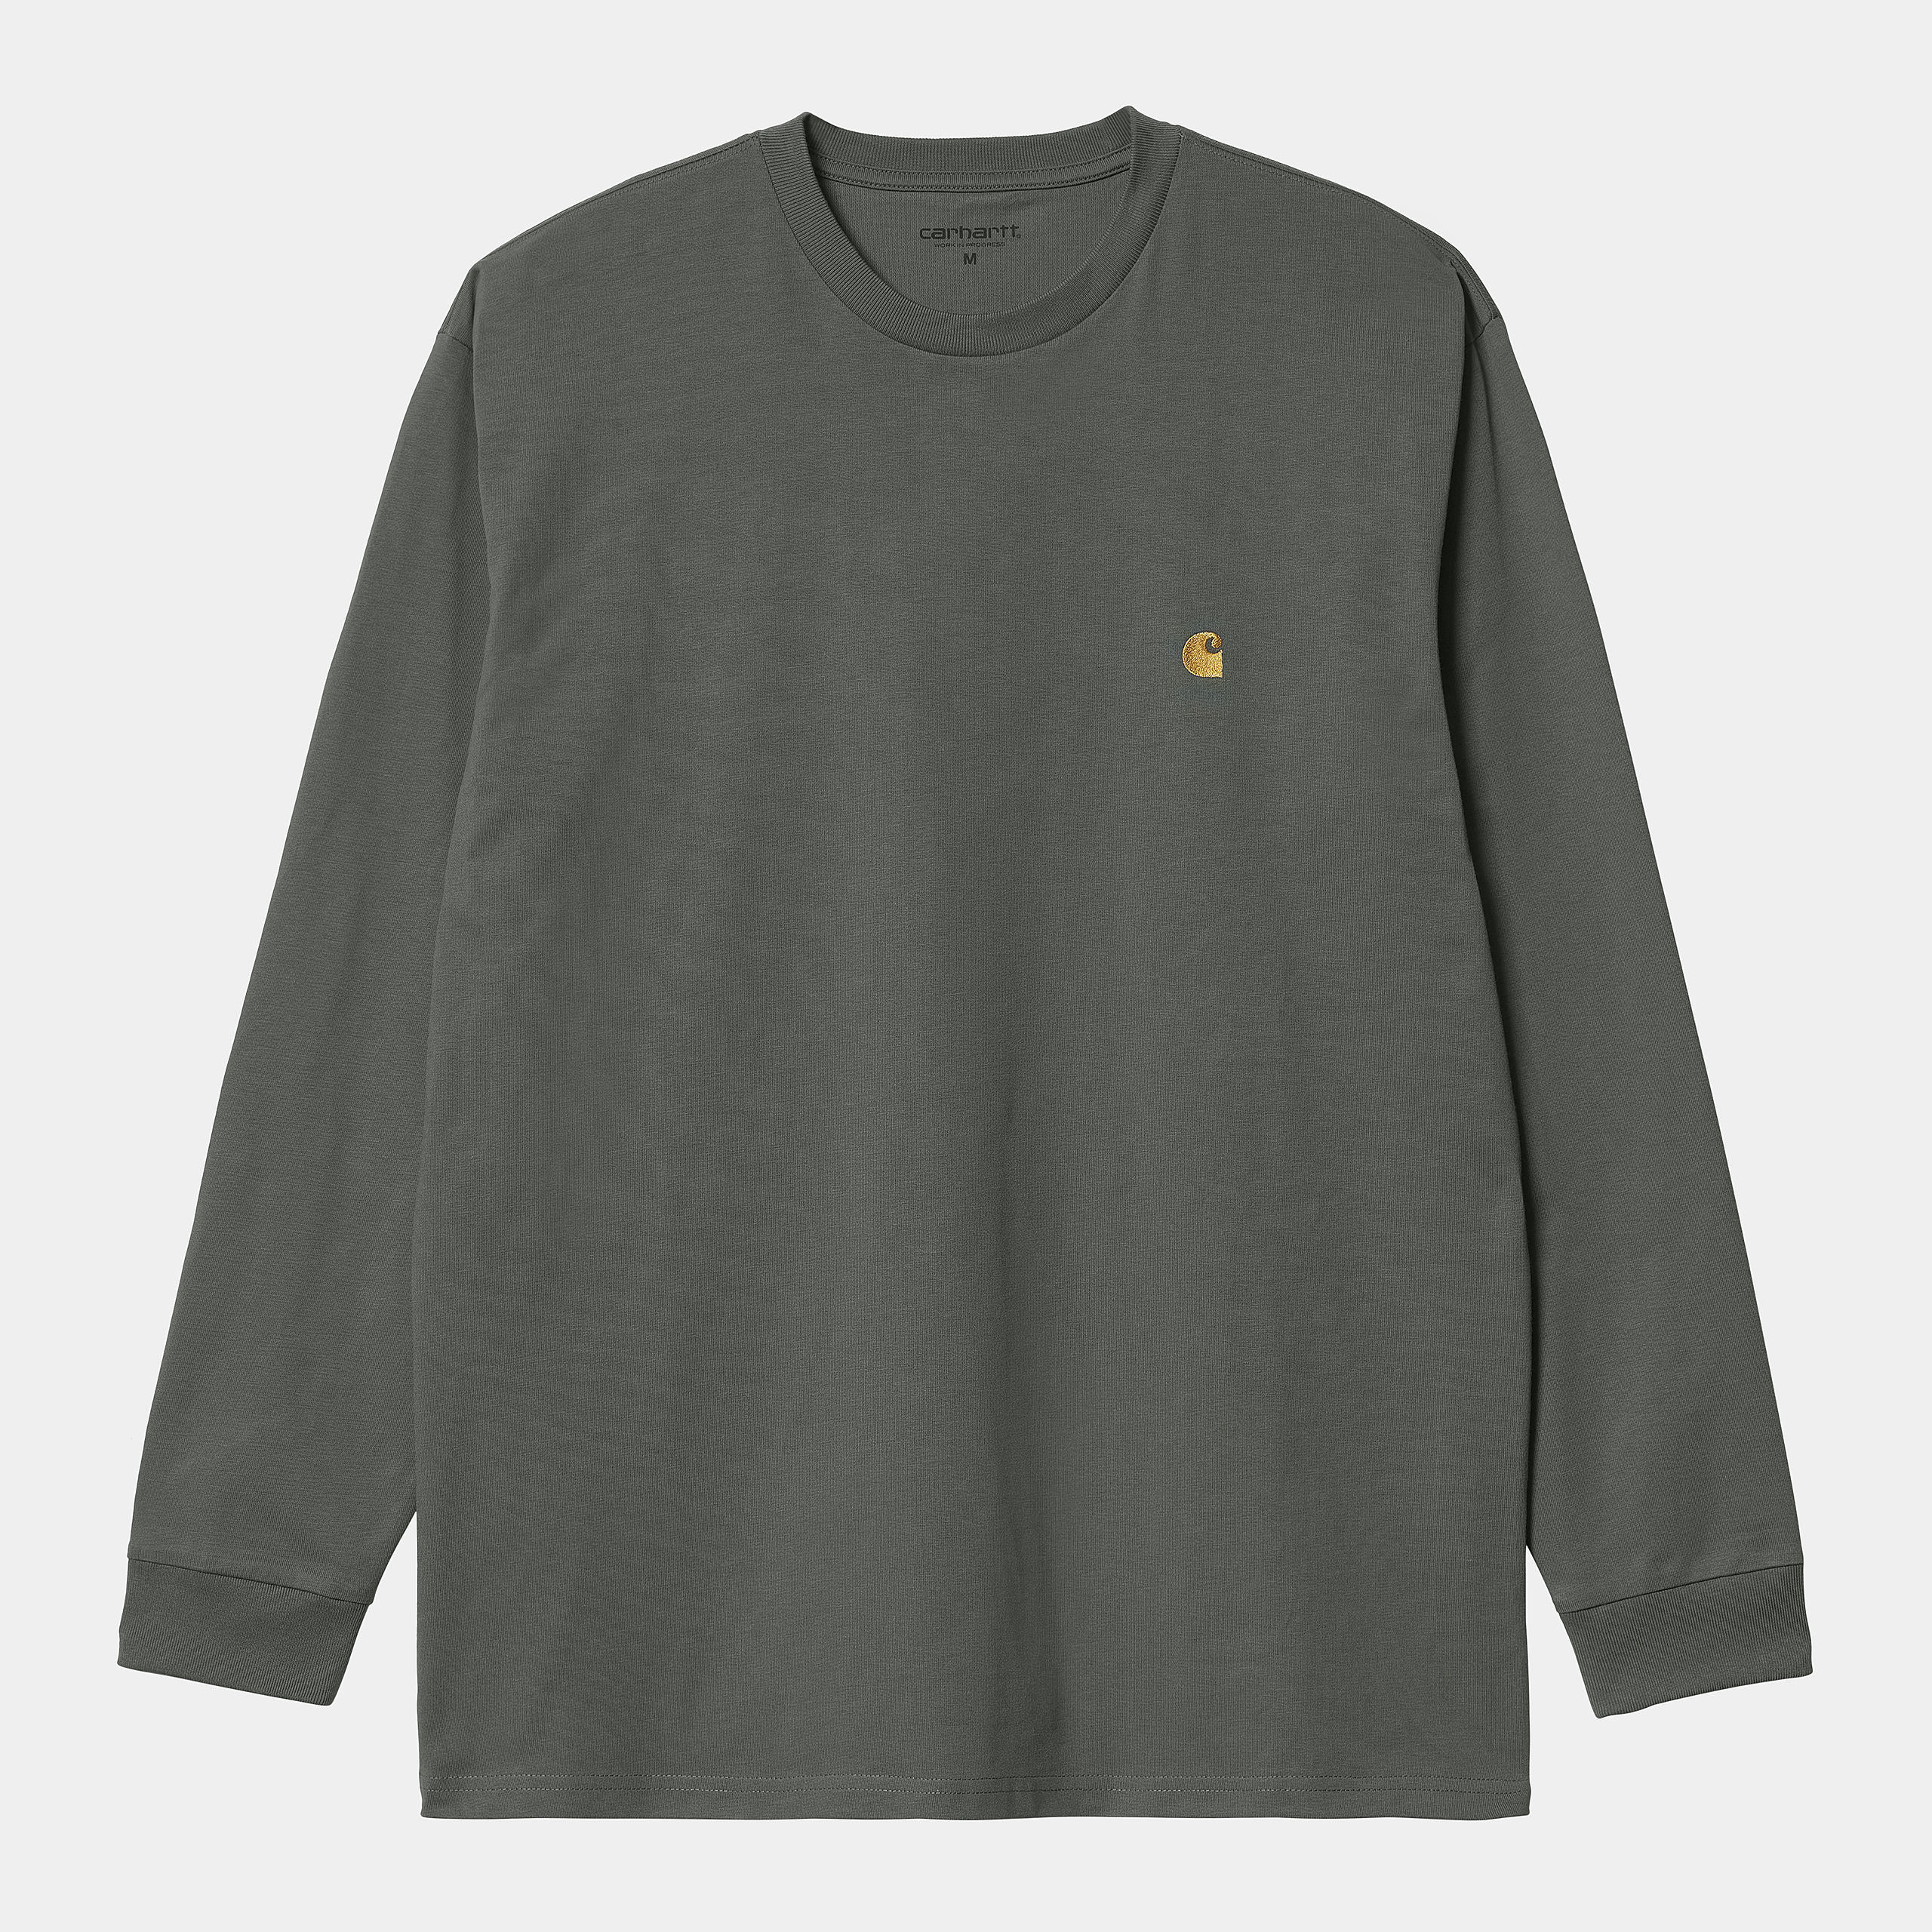 Carhartt WIP - L/S CHASE T-SHIRT - Thyme/Gold